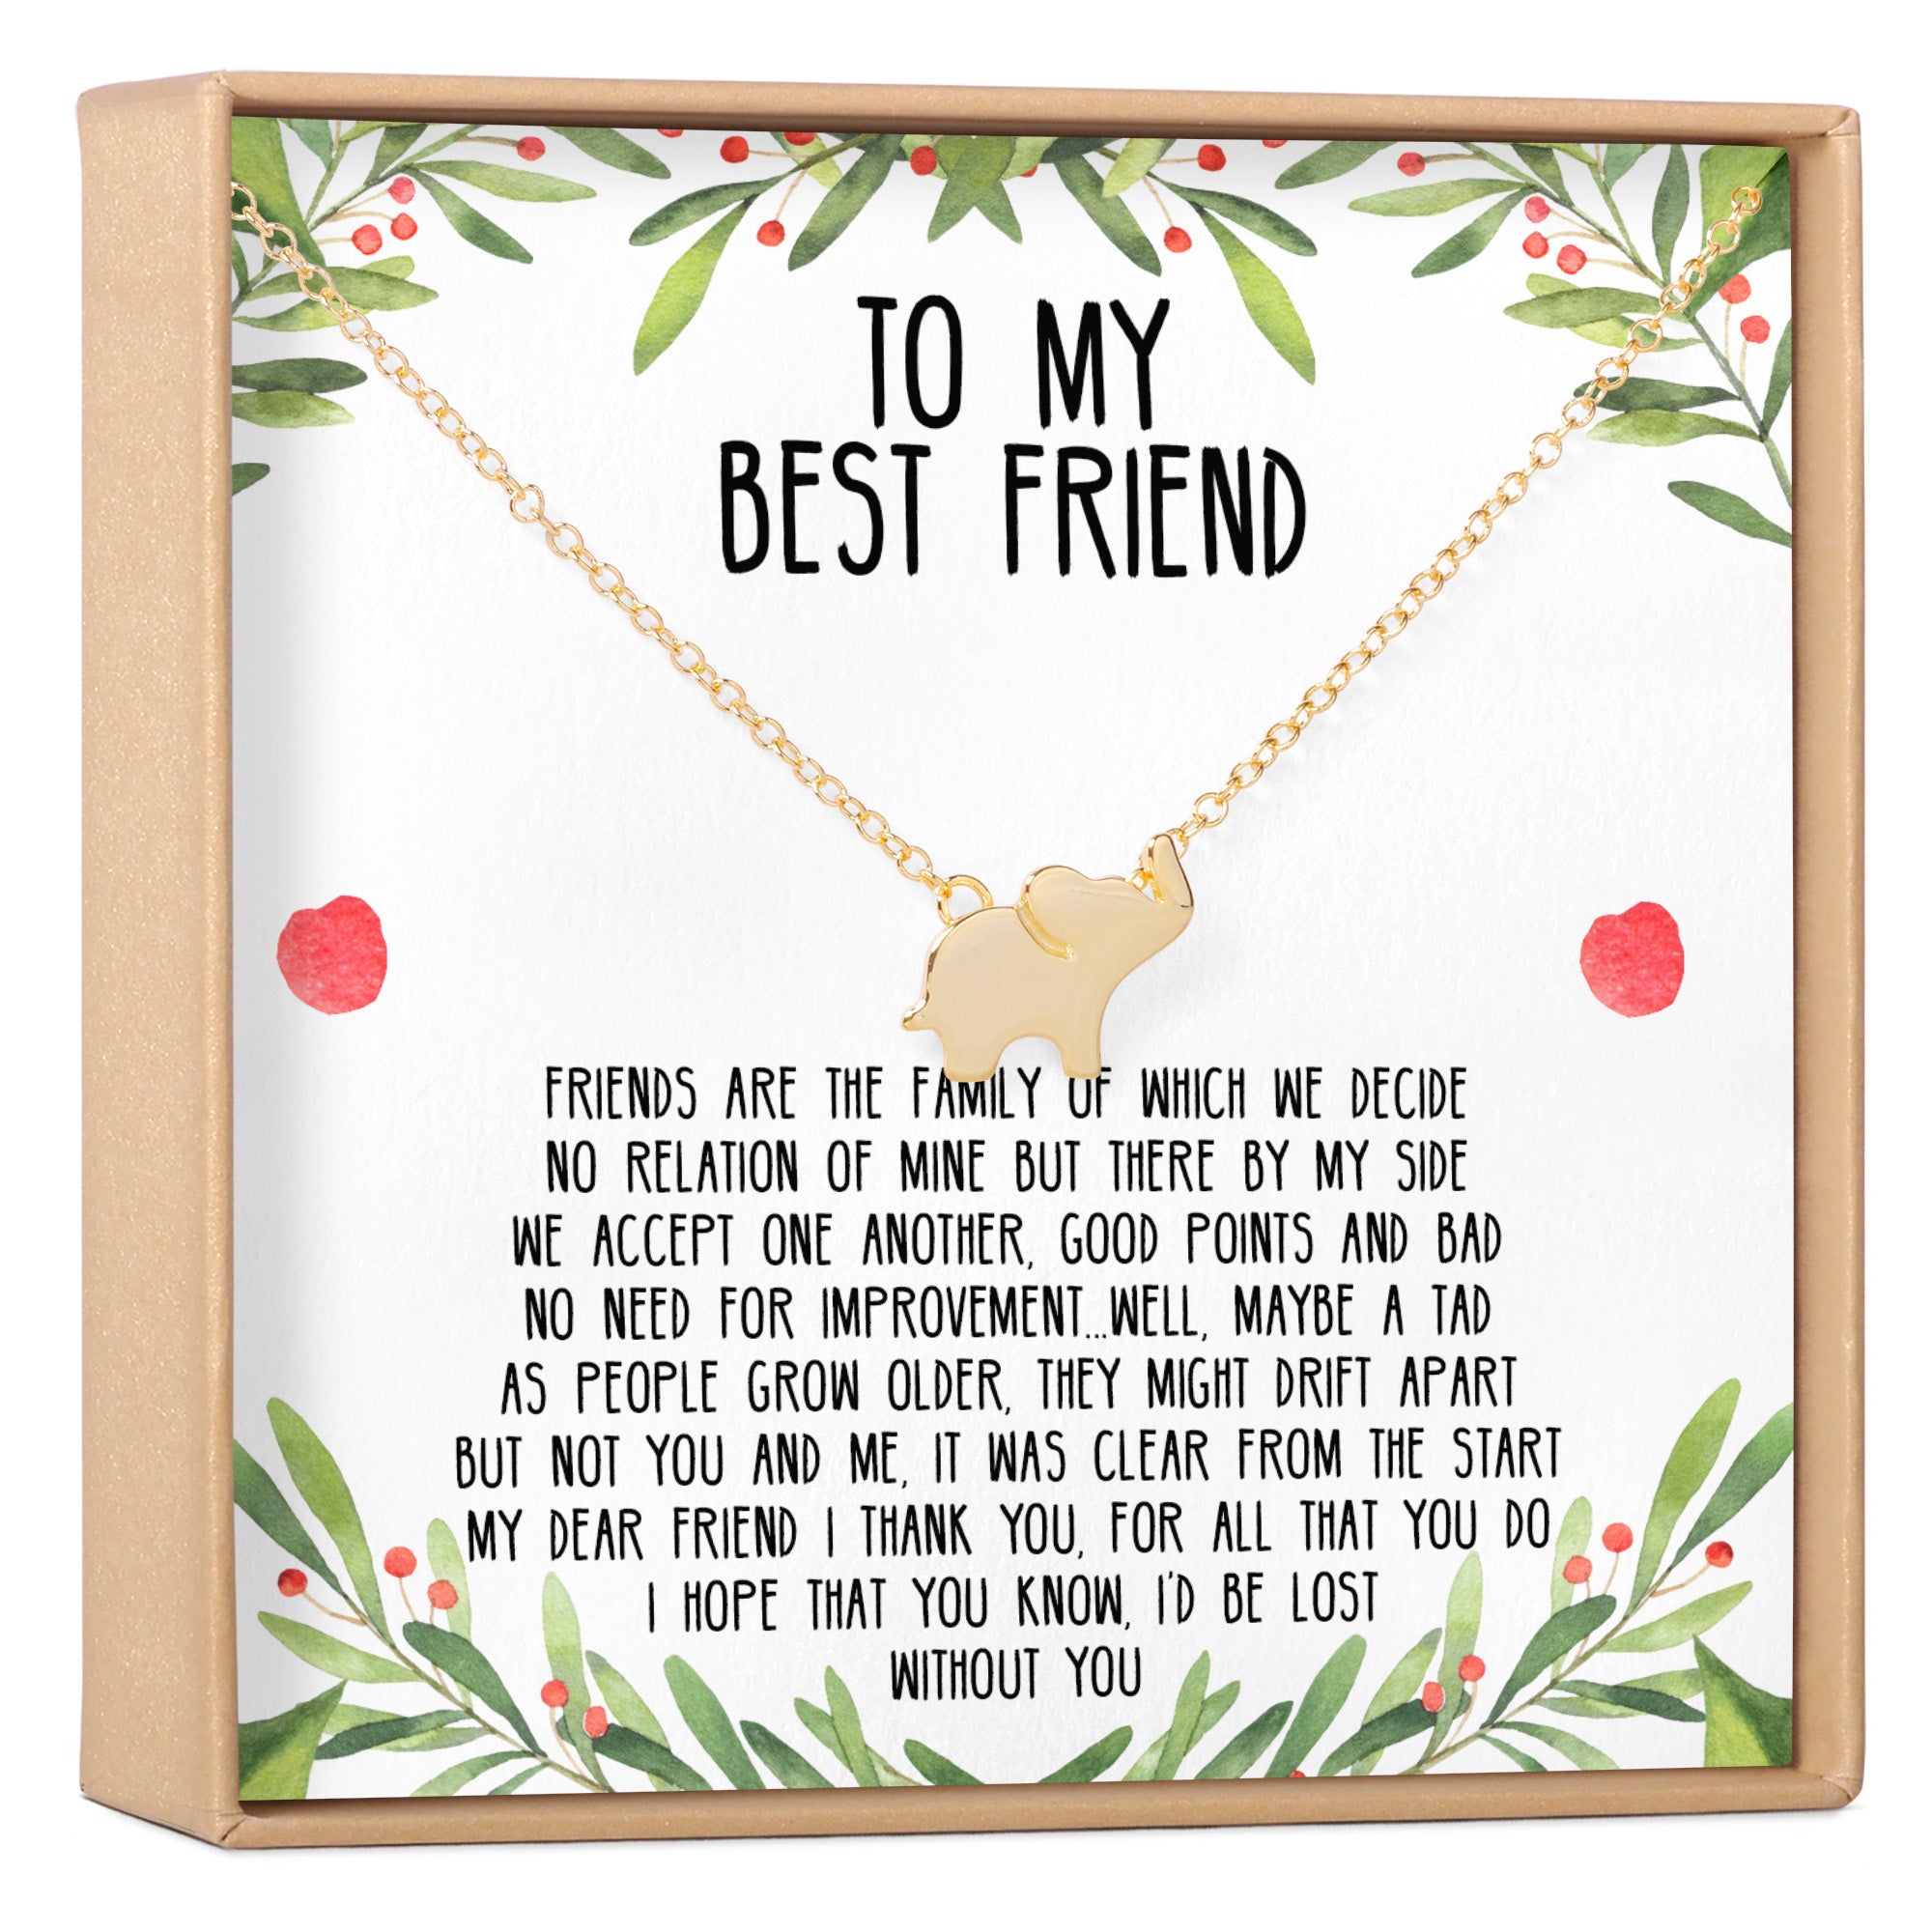 Personalized Best Friend Gifts | Birthday Gift Ideas For Friends - Unifury